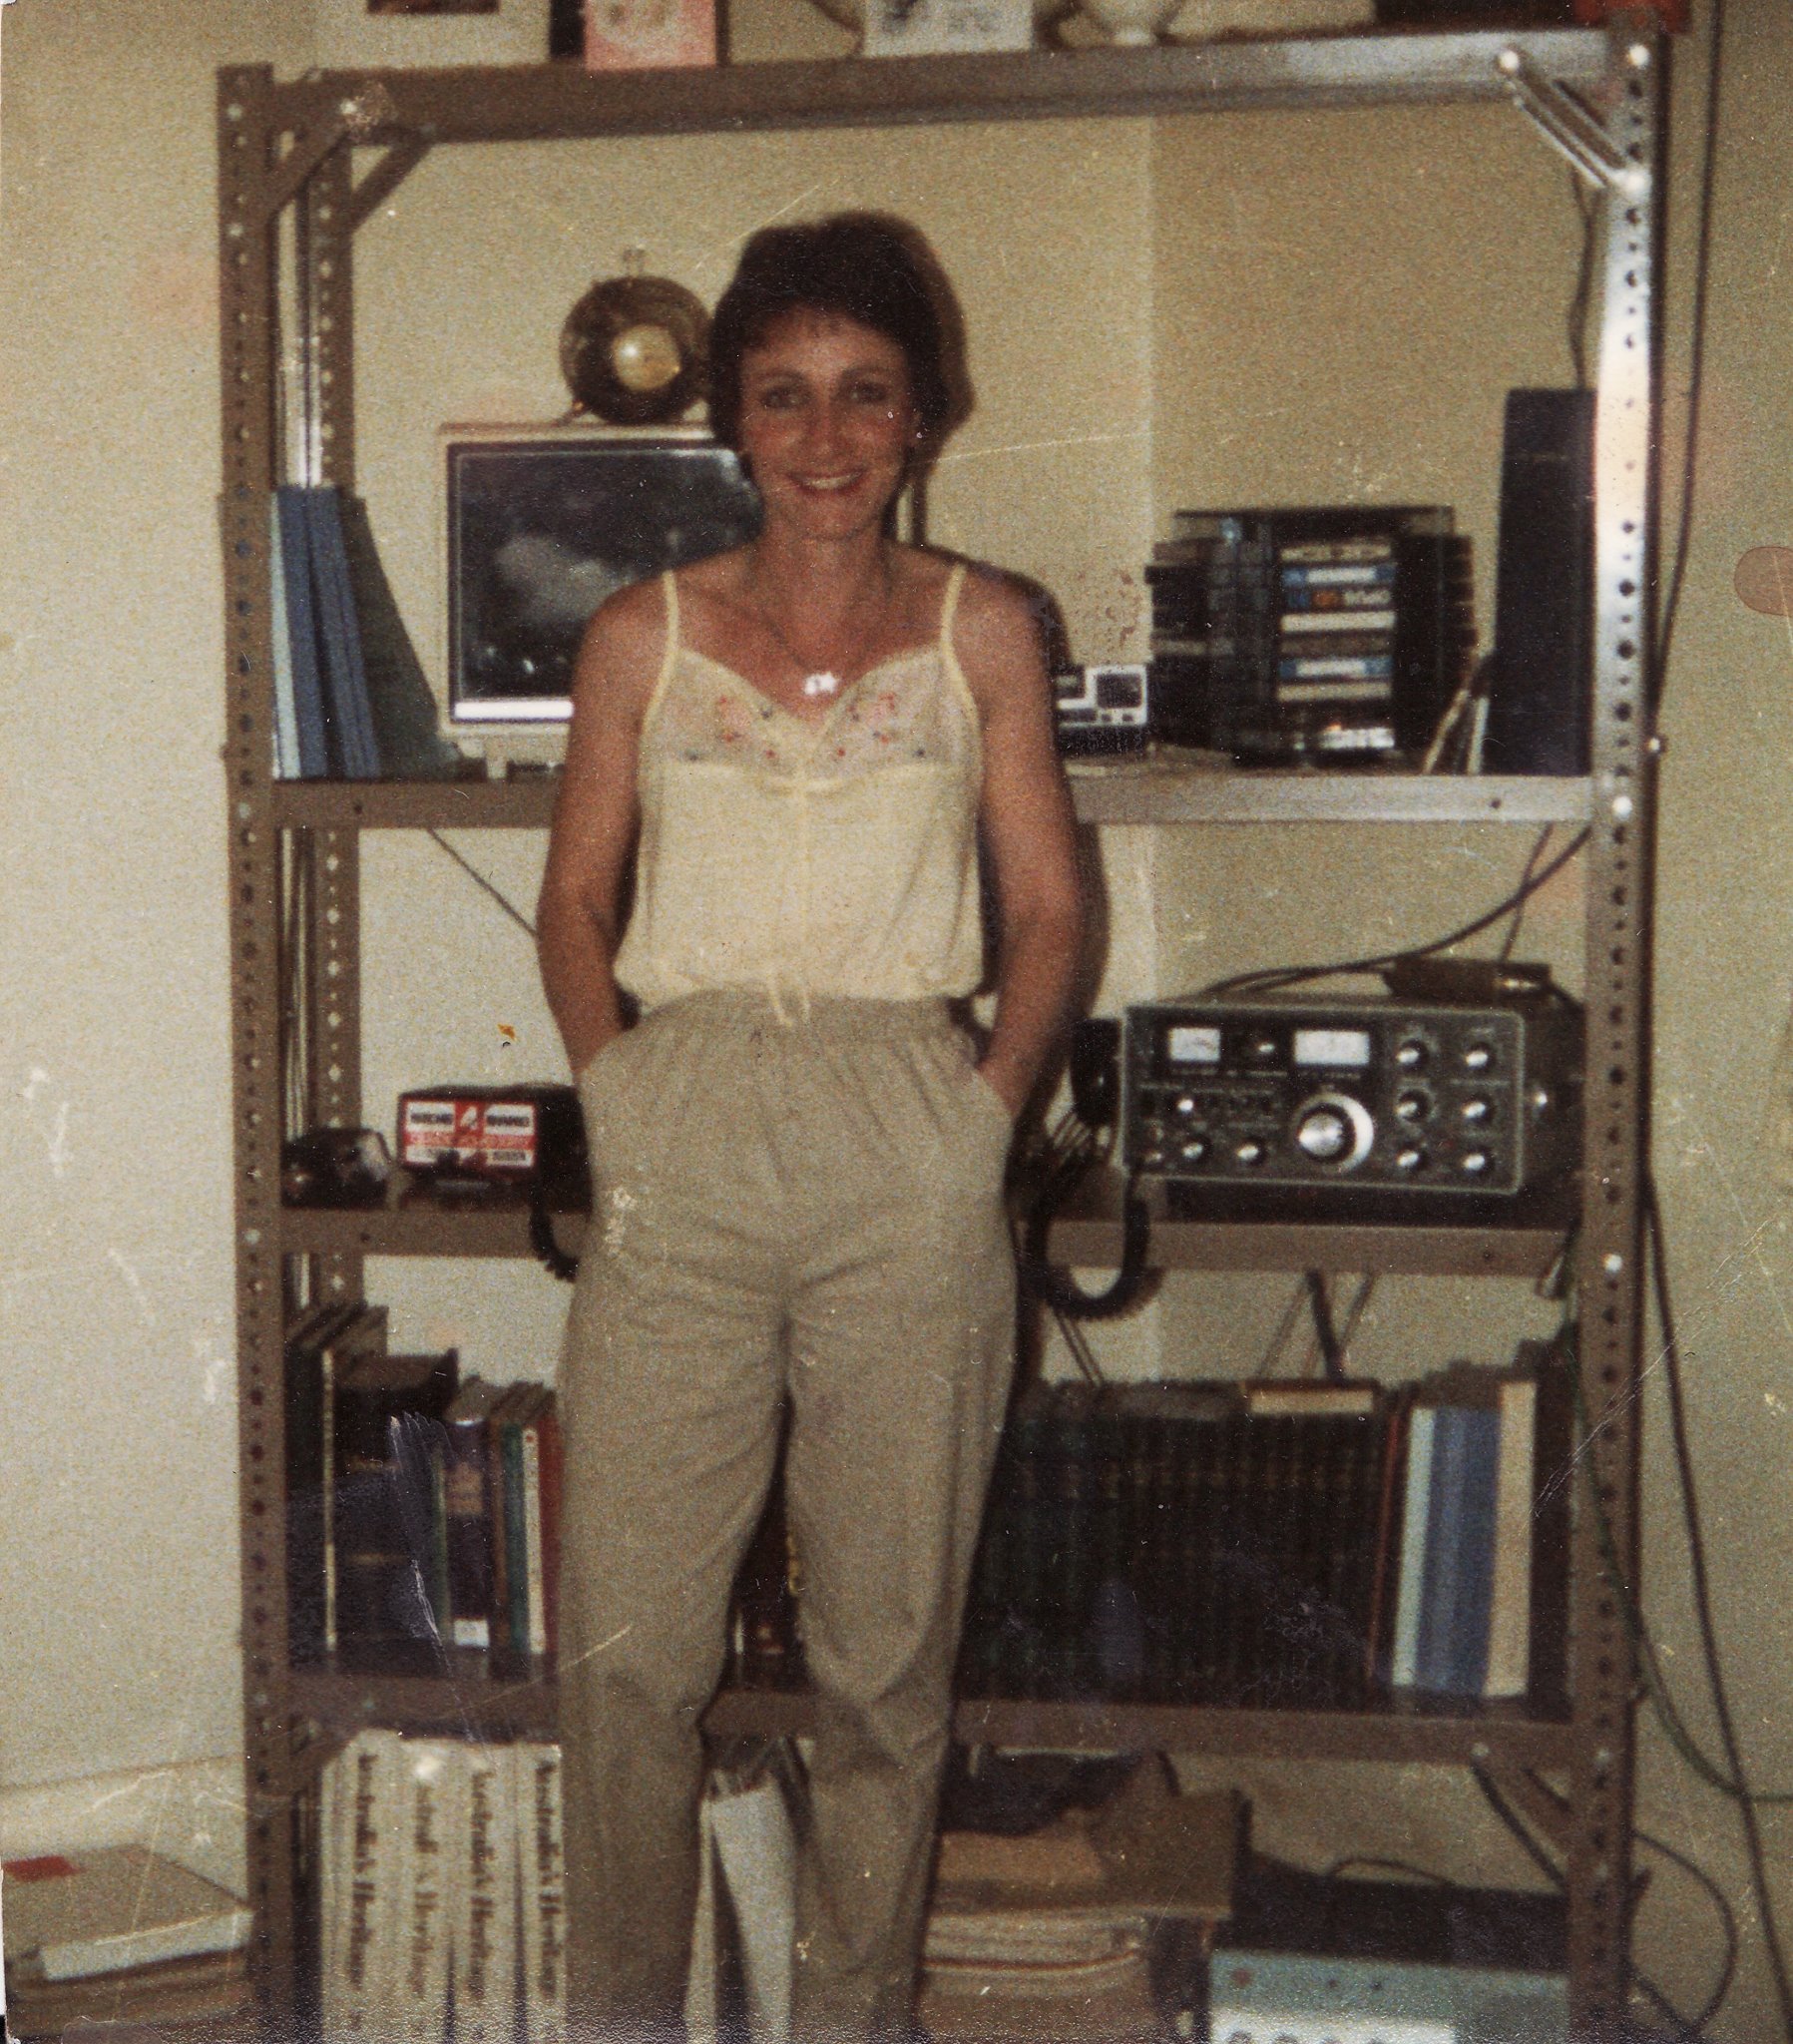 sue standing in front of radios